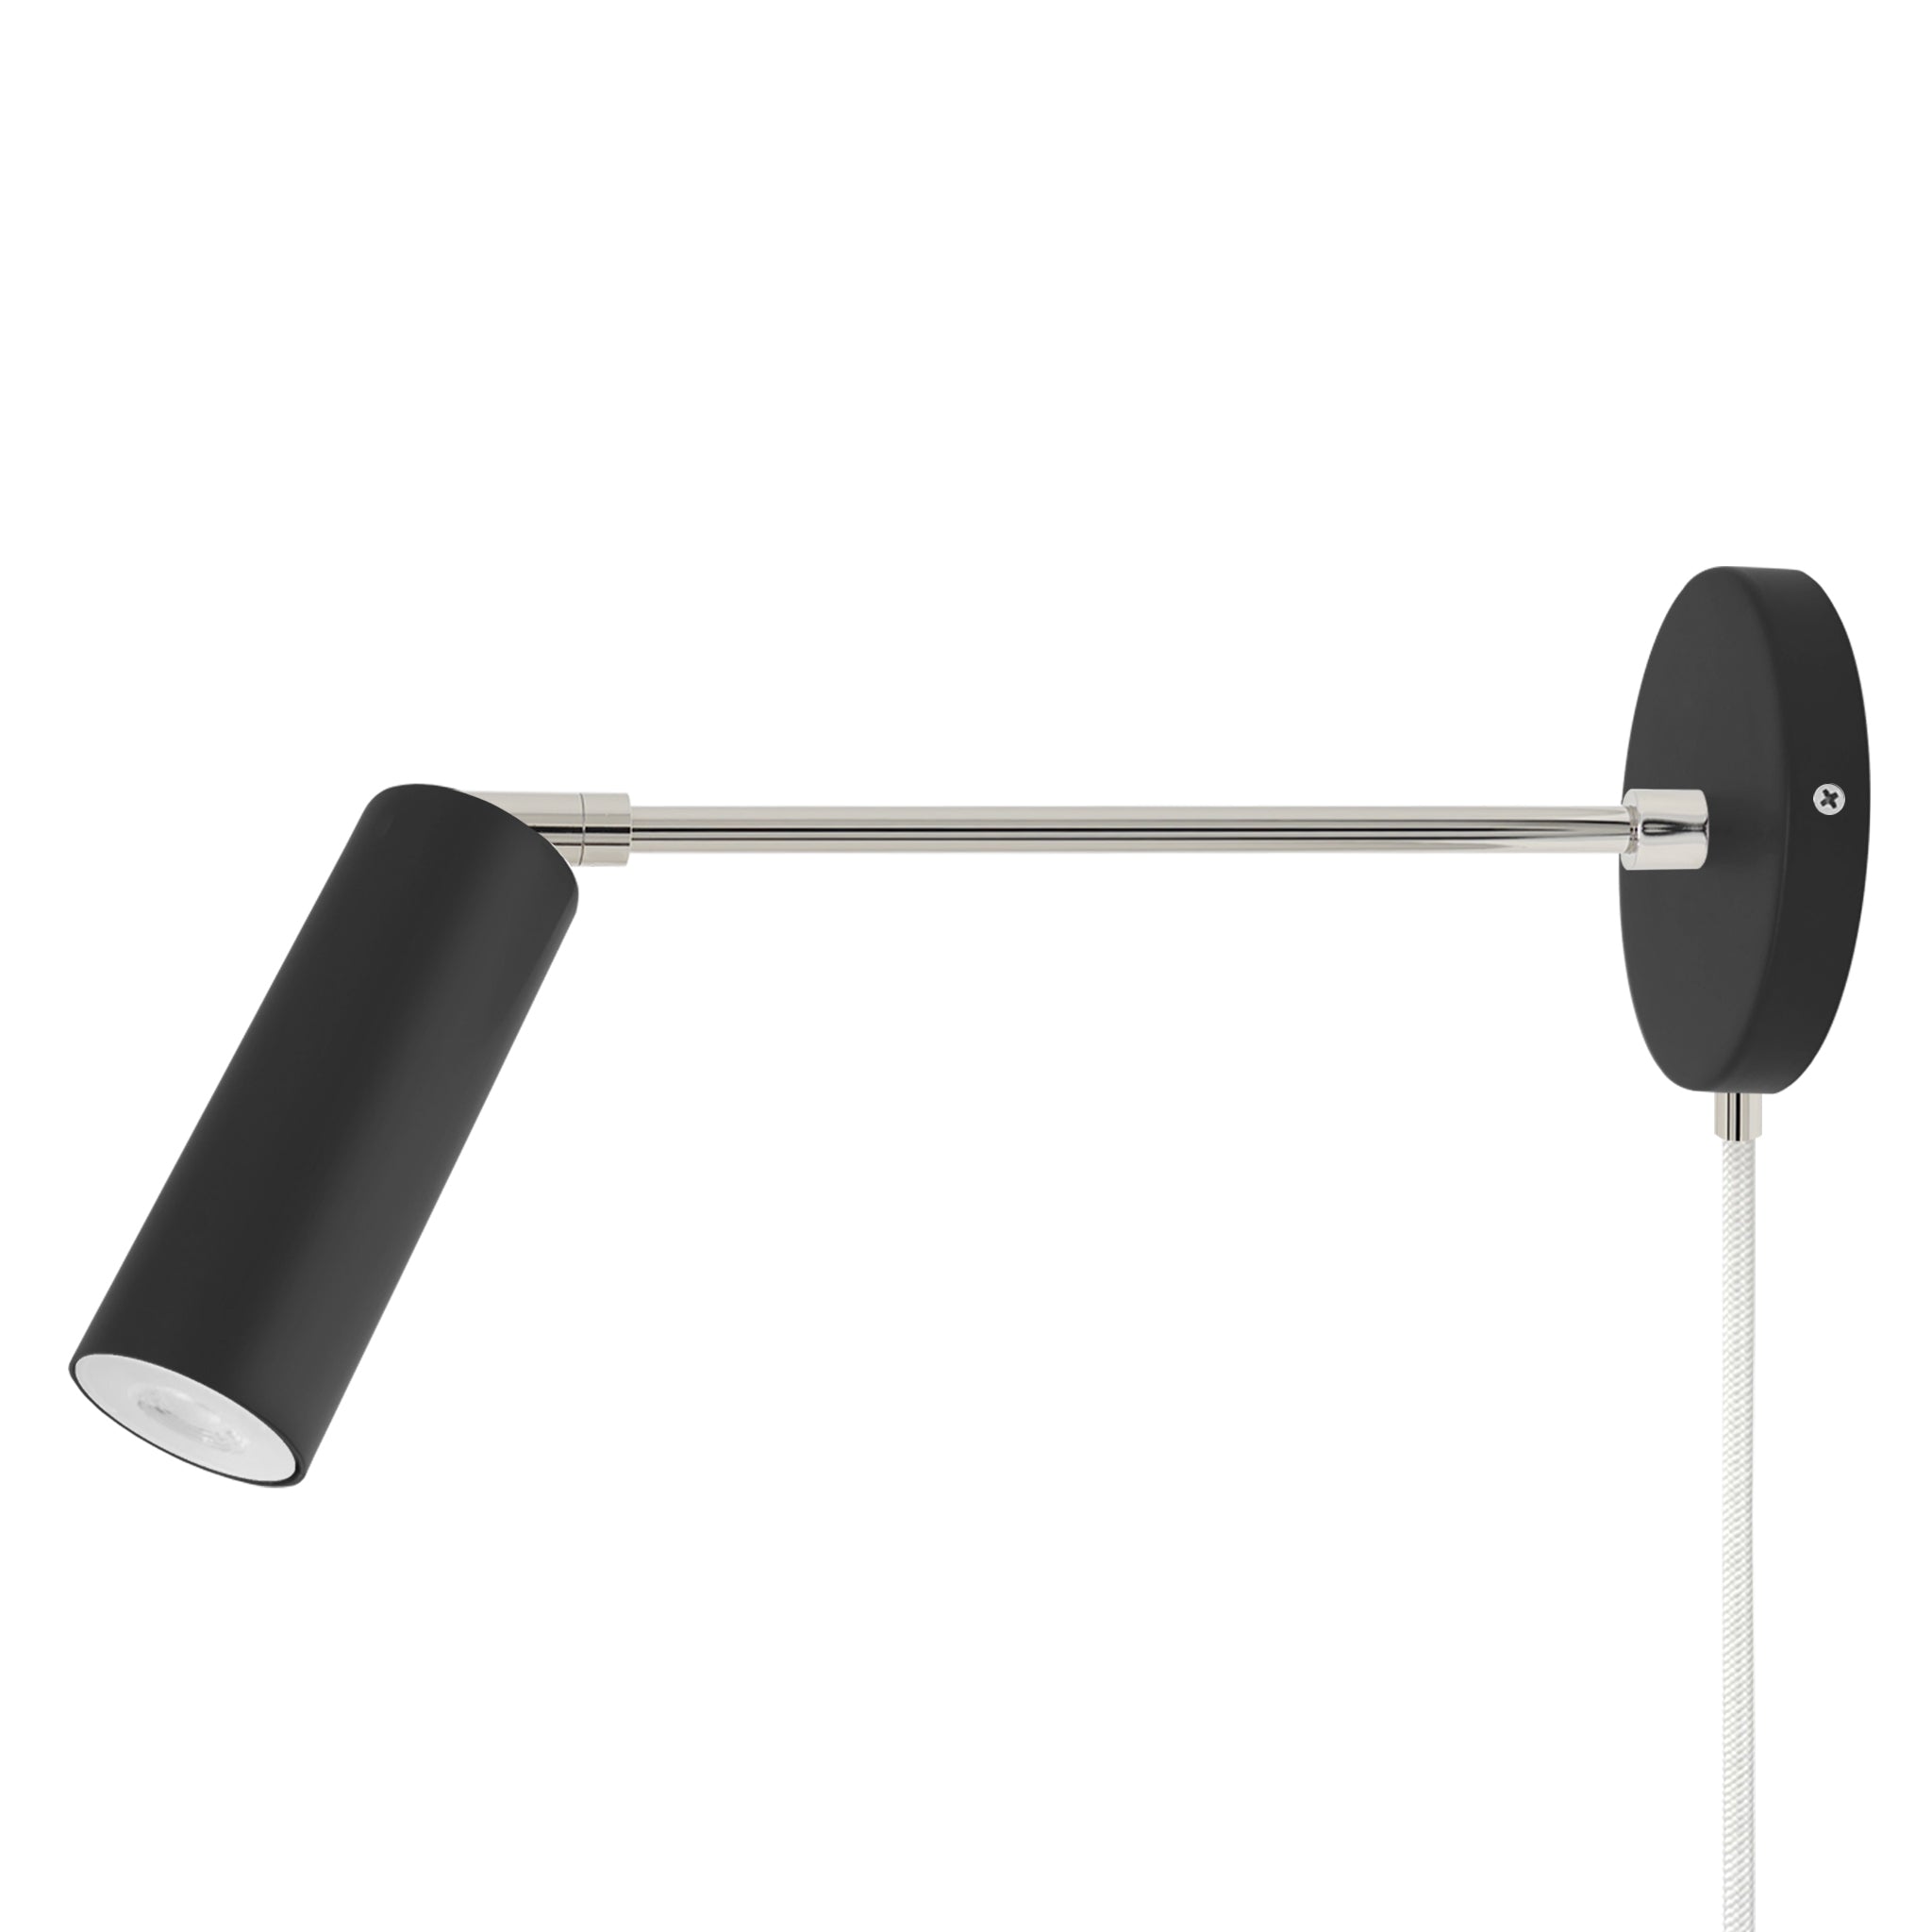 Nickel and black color Reader plug-in sconce 10" arm Dutton Brown lighting